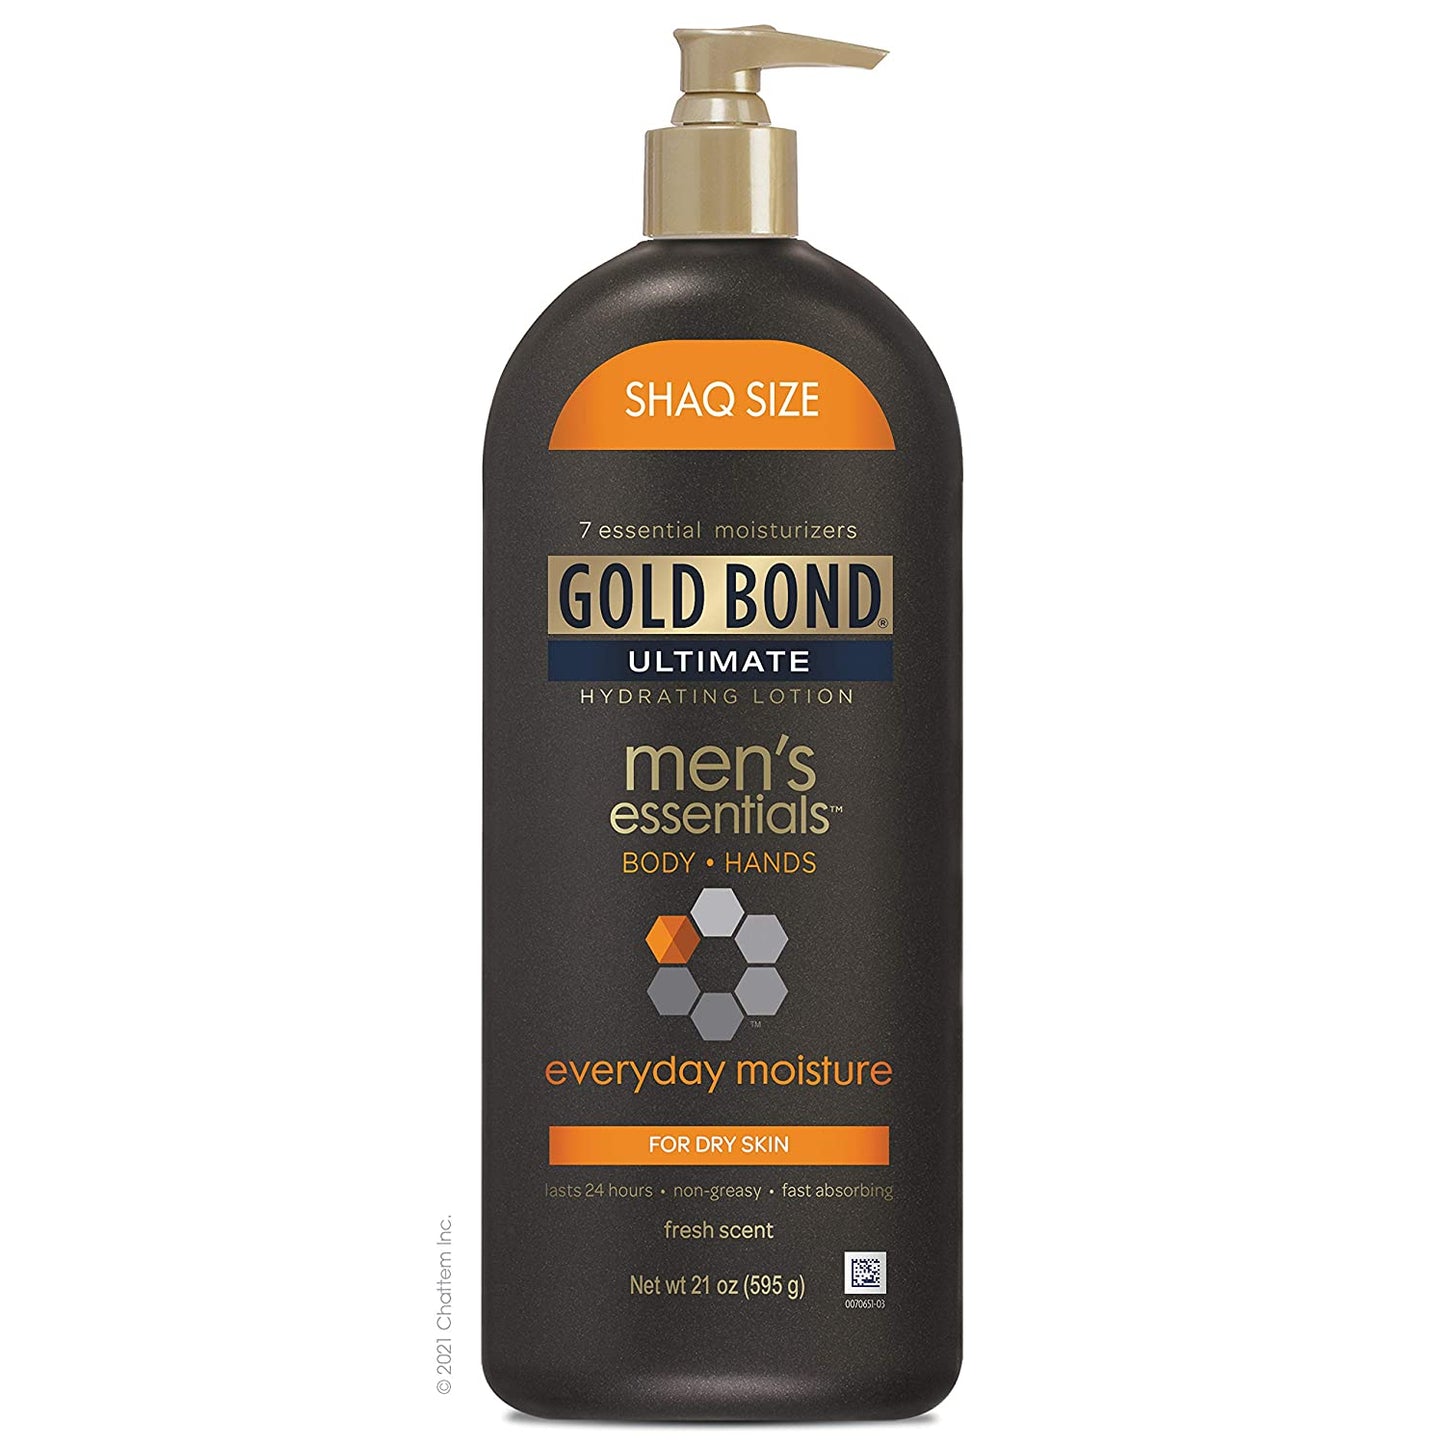 GOLD BOND ULTIMATE MEN'S ESSENTIAL HYDRATING LOTION 411G